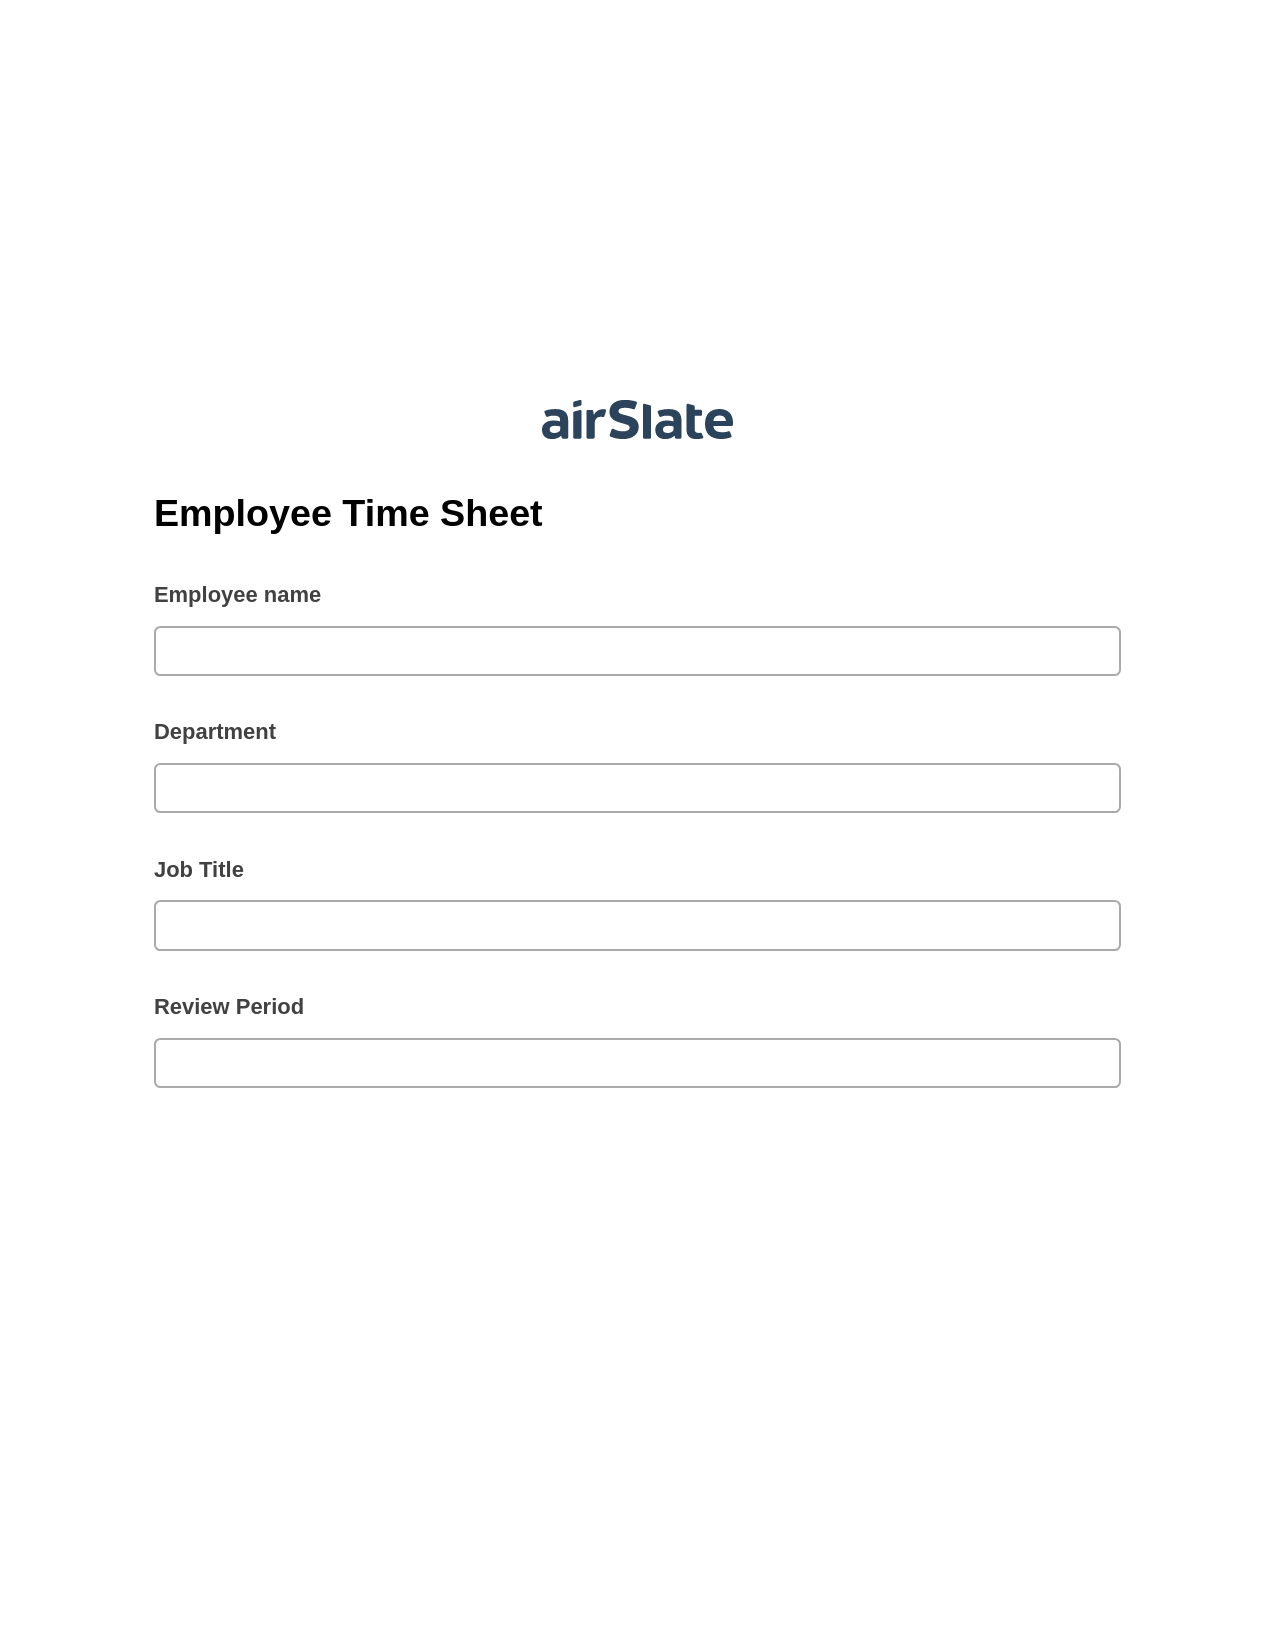 Multirole Employee Time Sheet Pre-fill Dropdowns from CSV file Bot, Assign Roles to Recipients Bot, Export to Excel 365 Bot